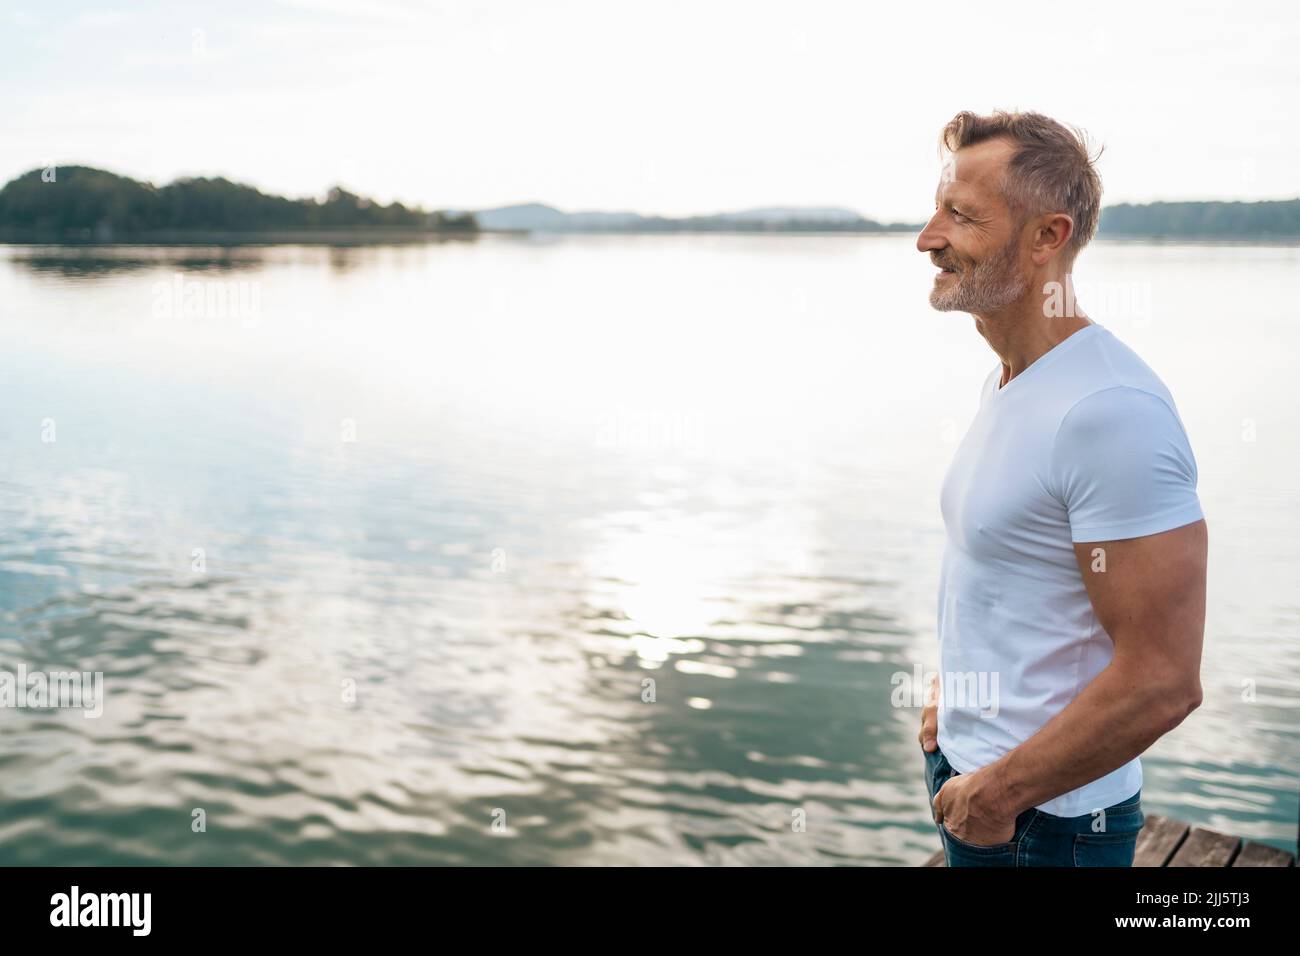 Smiling mature man with hands in pockets standing at lake Stock Photo